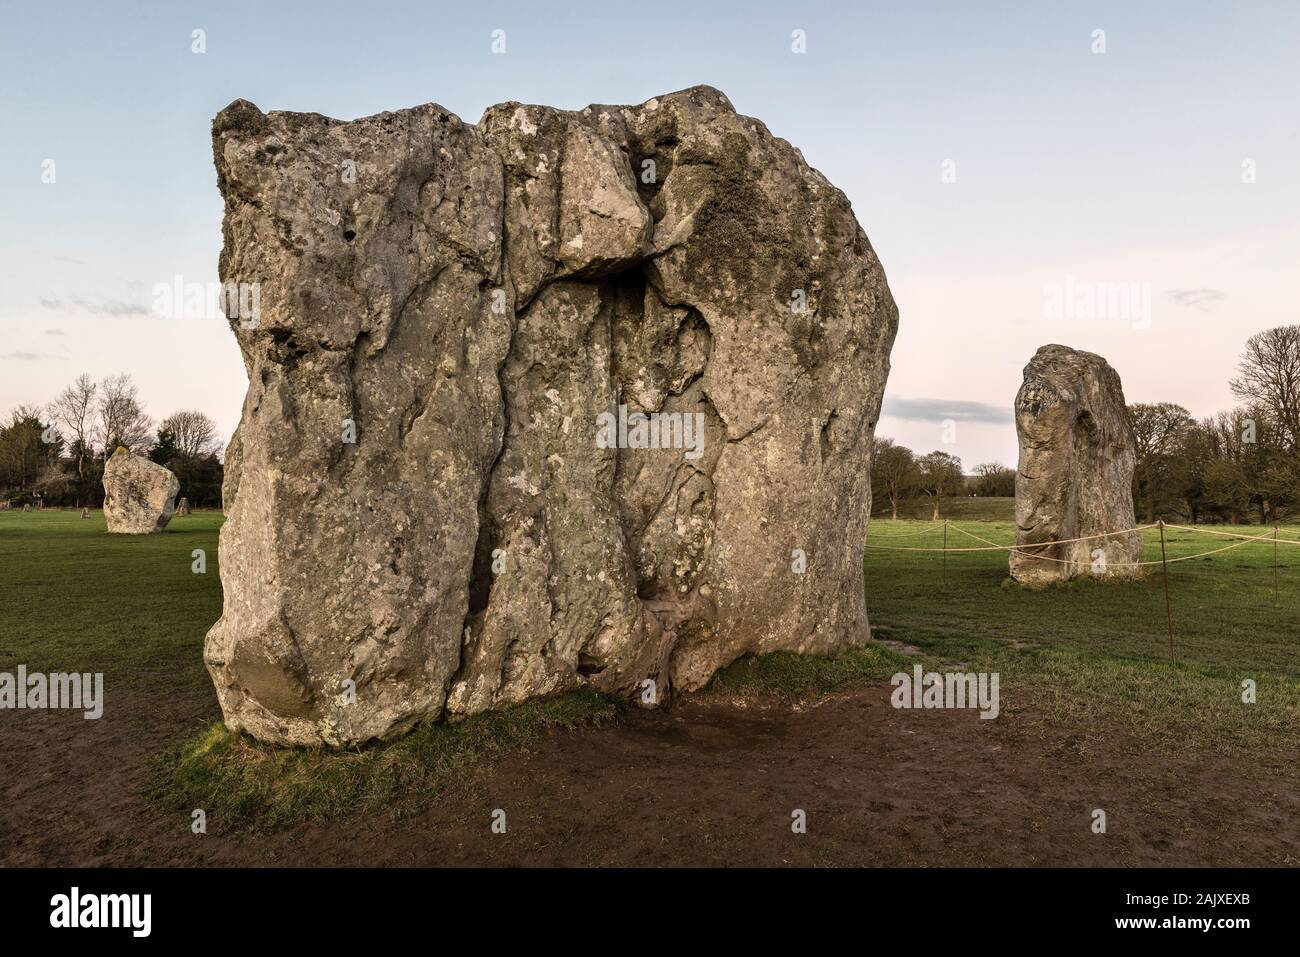 Avebury, Wiltshire, a vast Neolithic henge monument built around 3000 BC. The two portal stones marking the entrance, and part of the inner circle Stock Photo